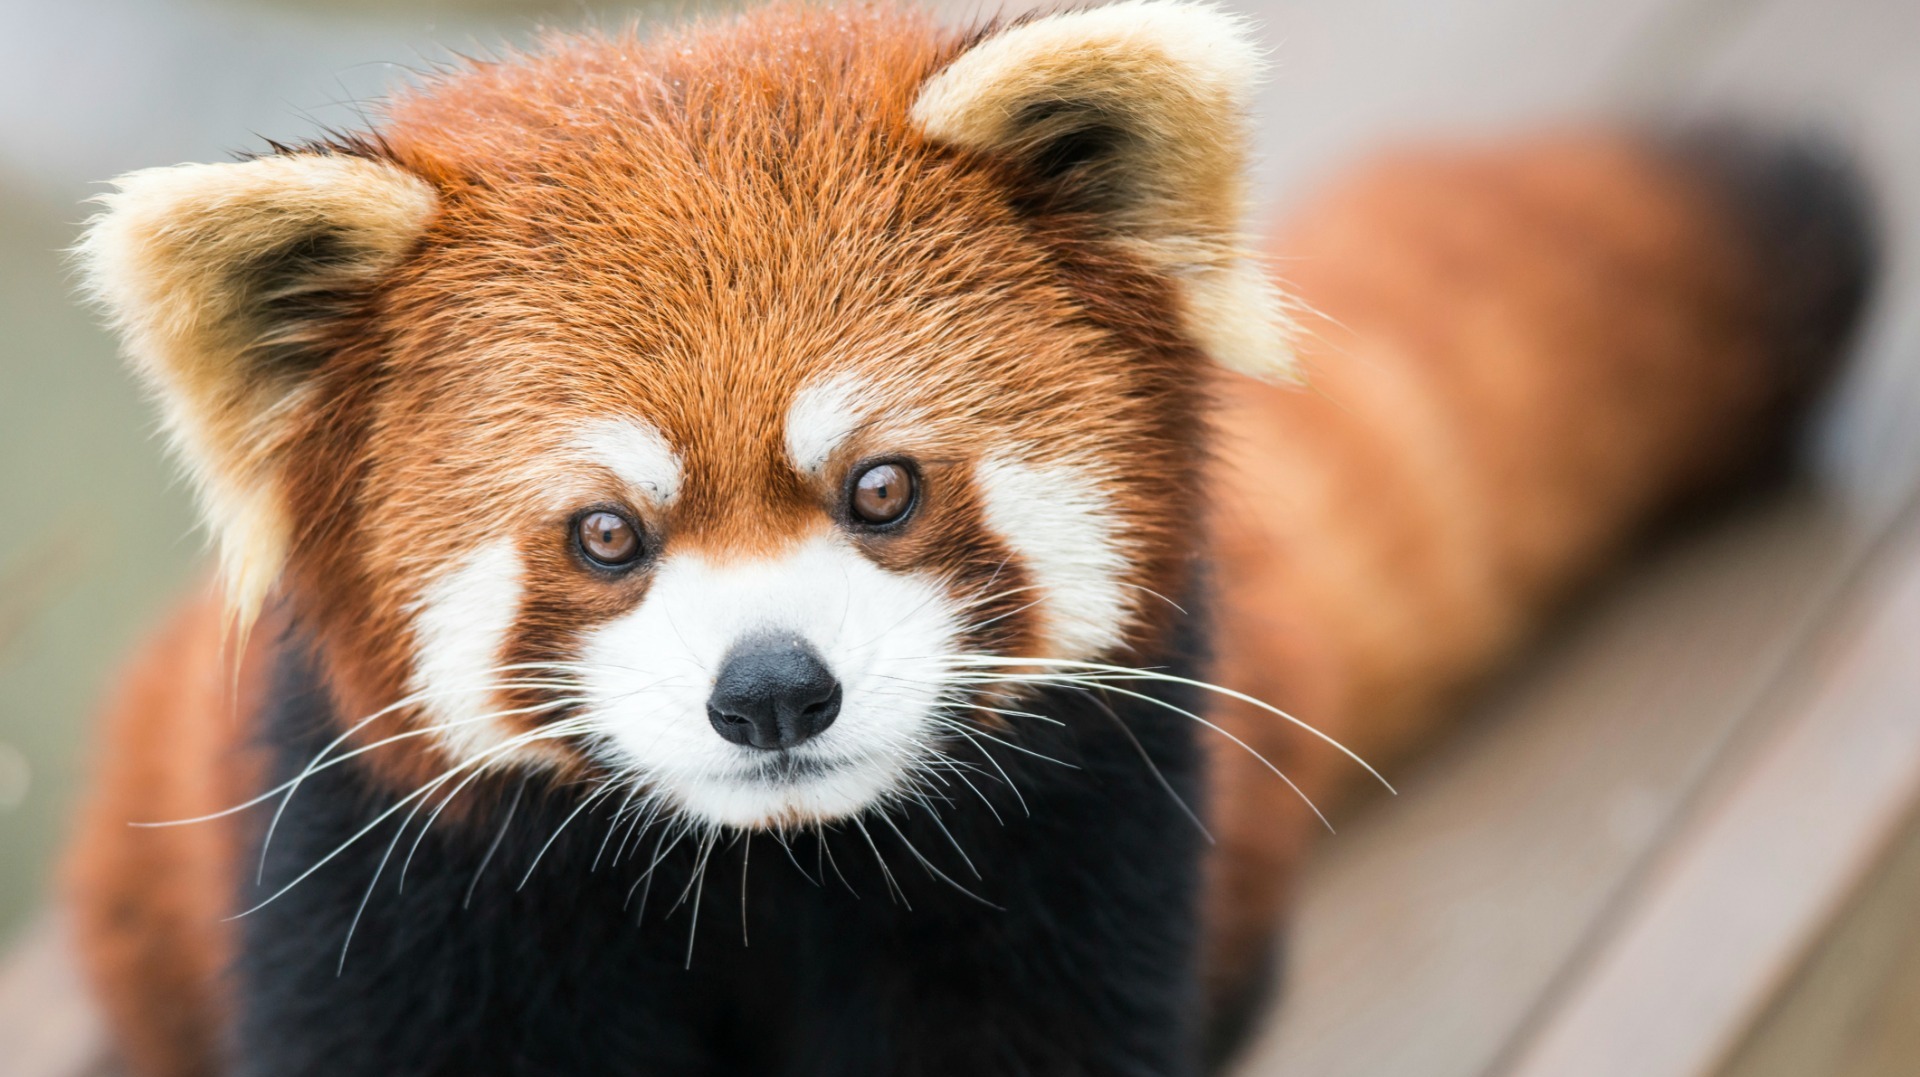 Prepare for a cuteness overload, thanks to these red panda GIFs